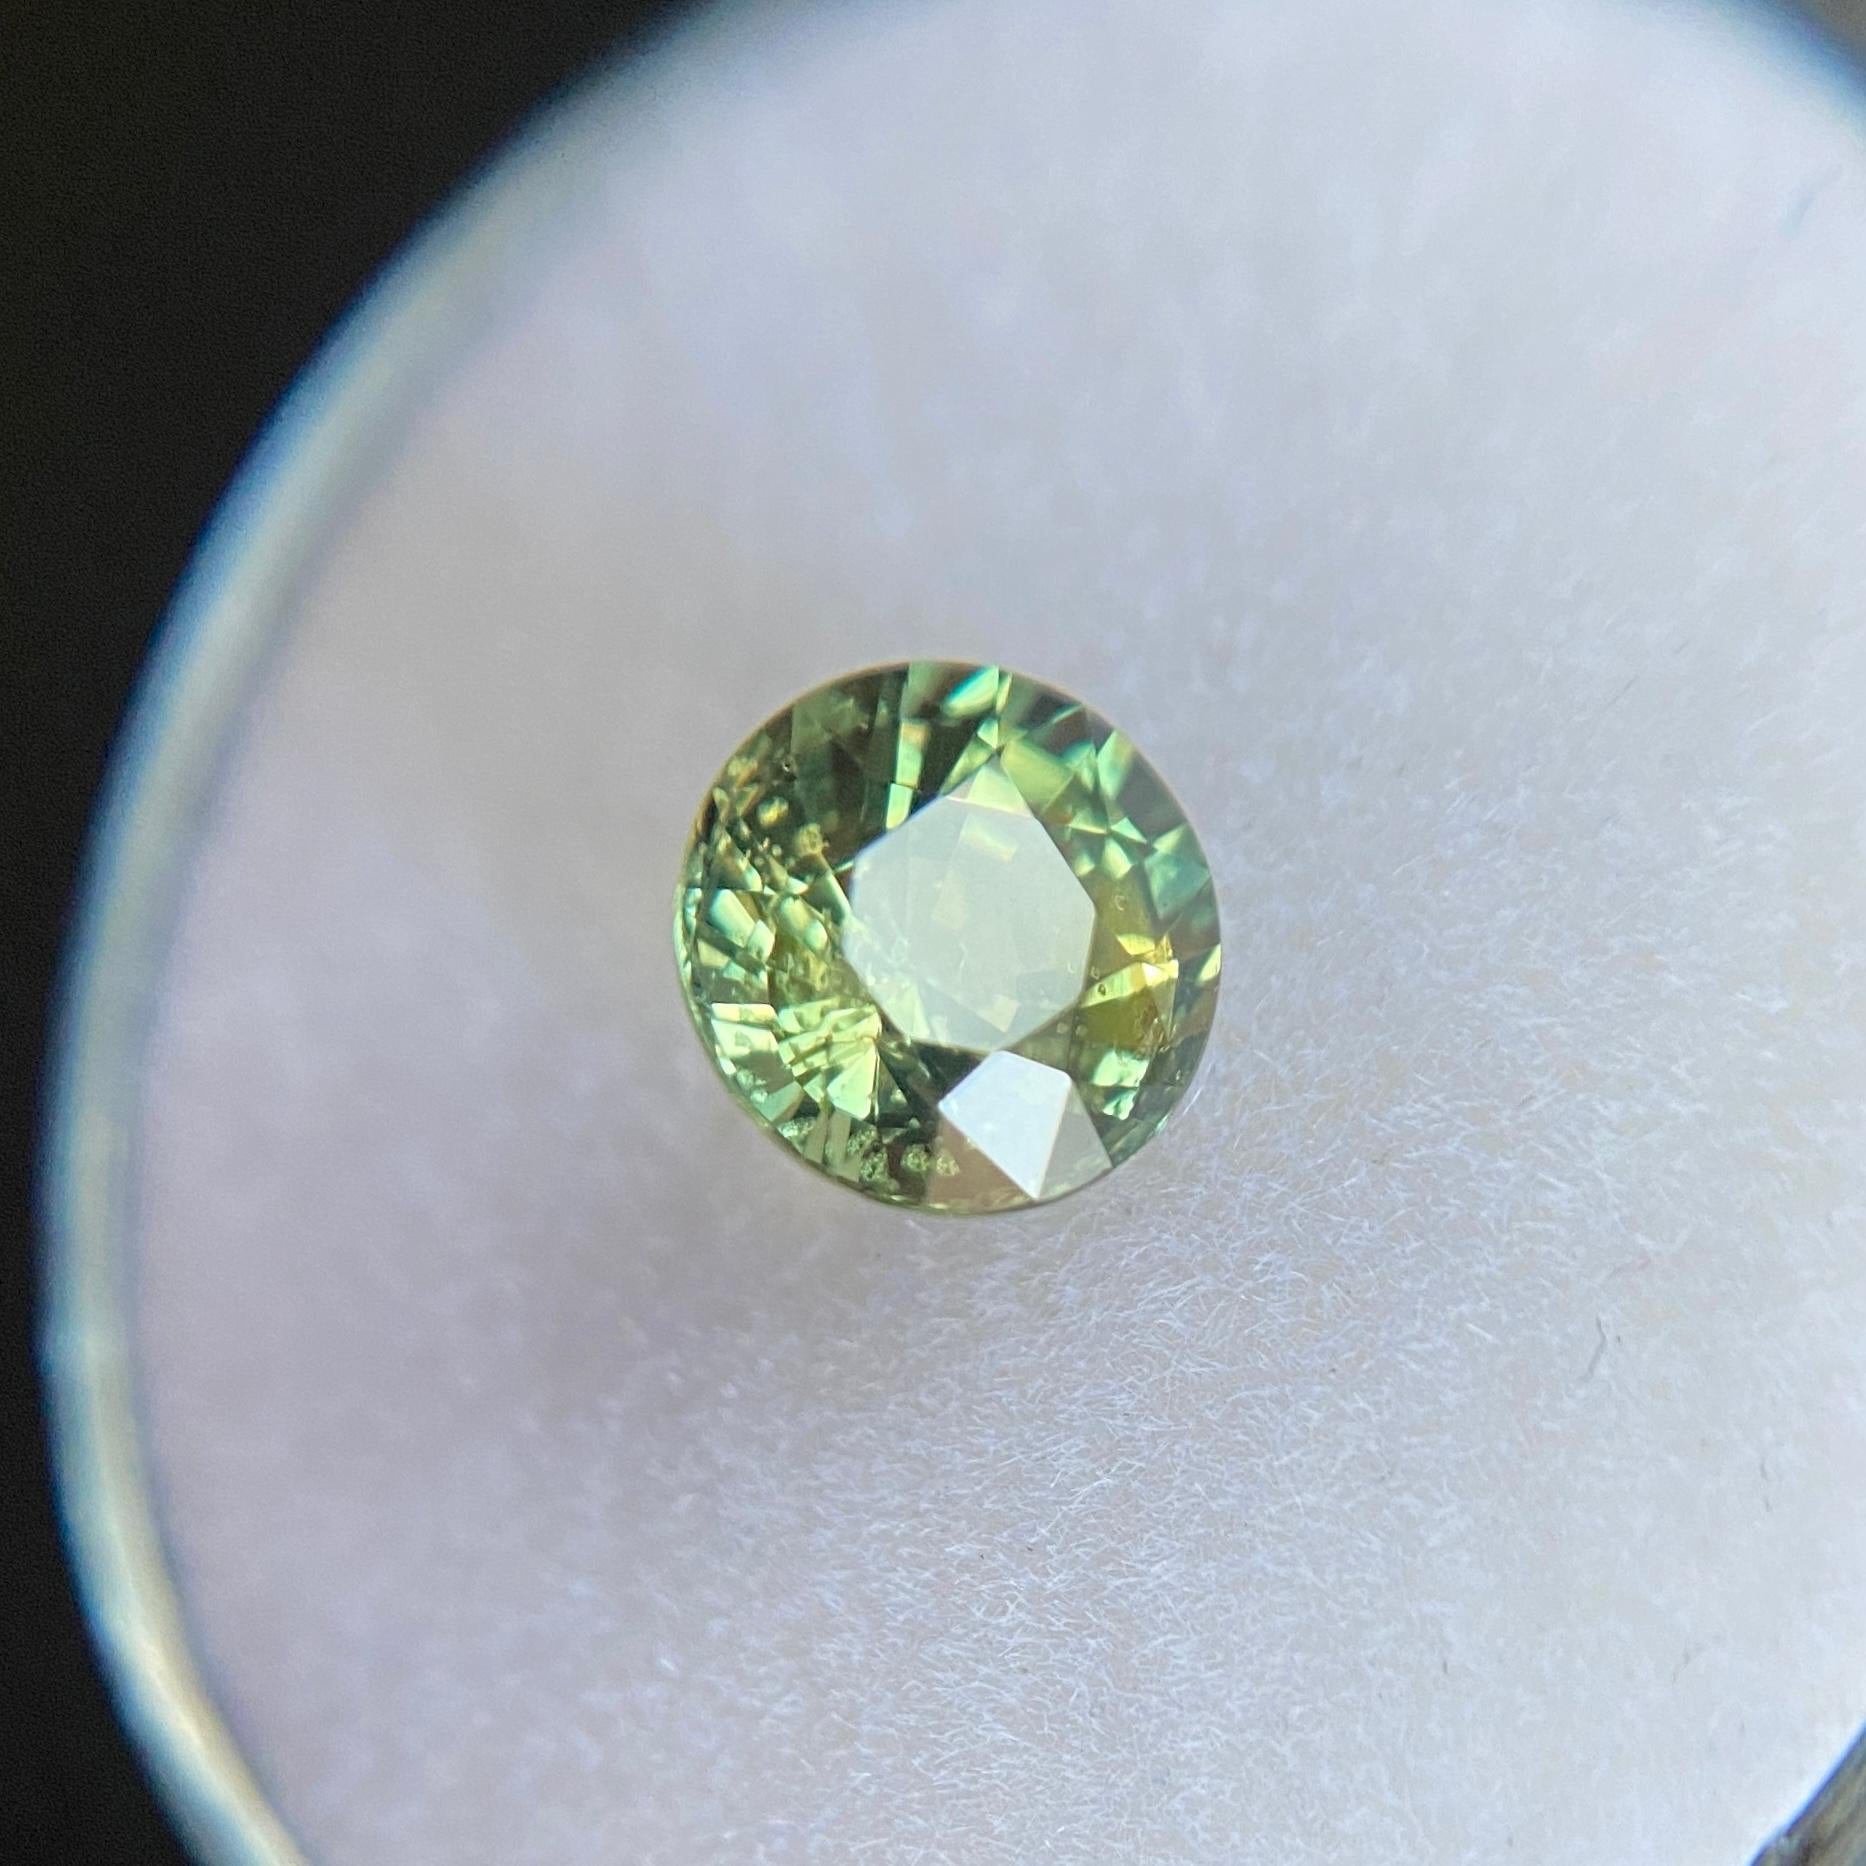 GIA Certified 1.36ct Untreated Vivid Green Yellow Sapphire Round Diamond Cut Gem For Sale 1